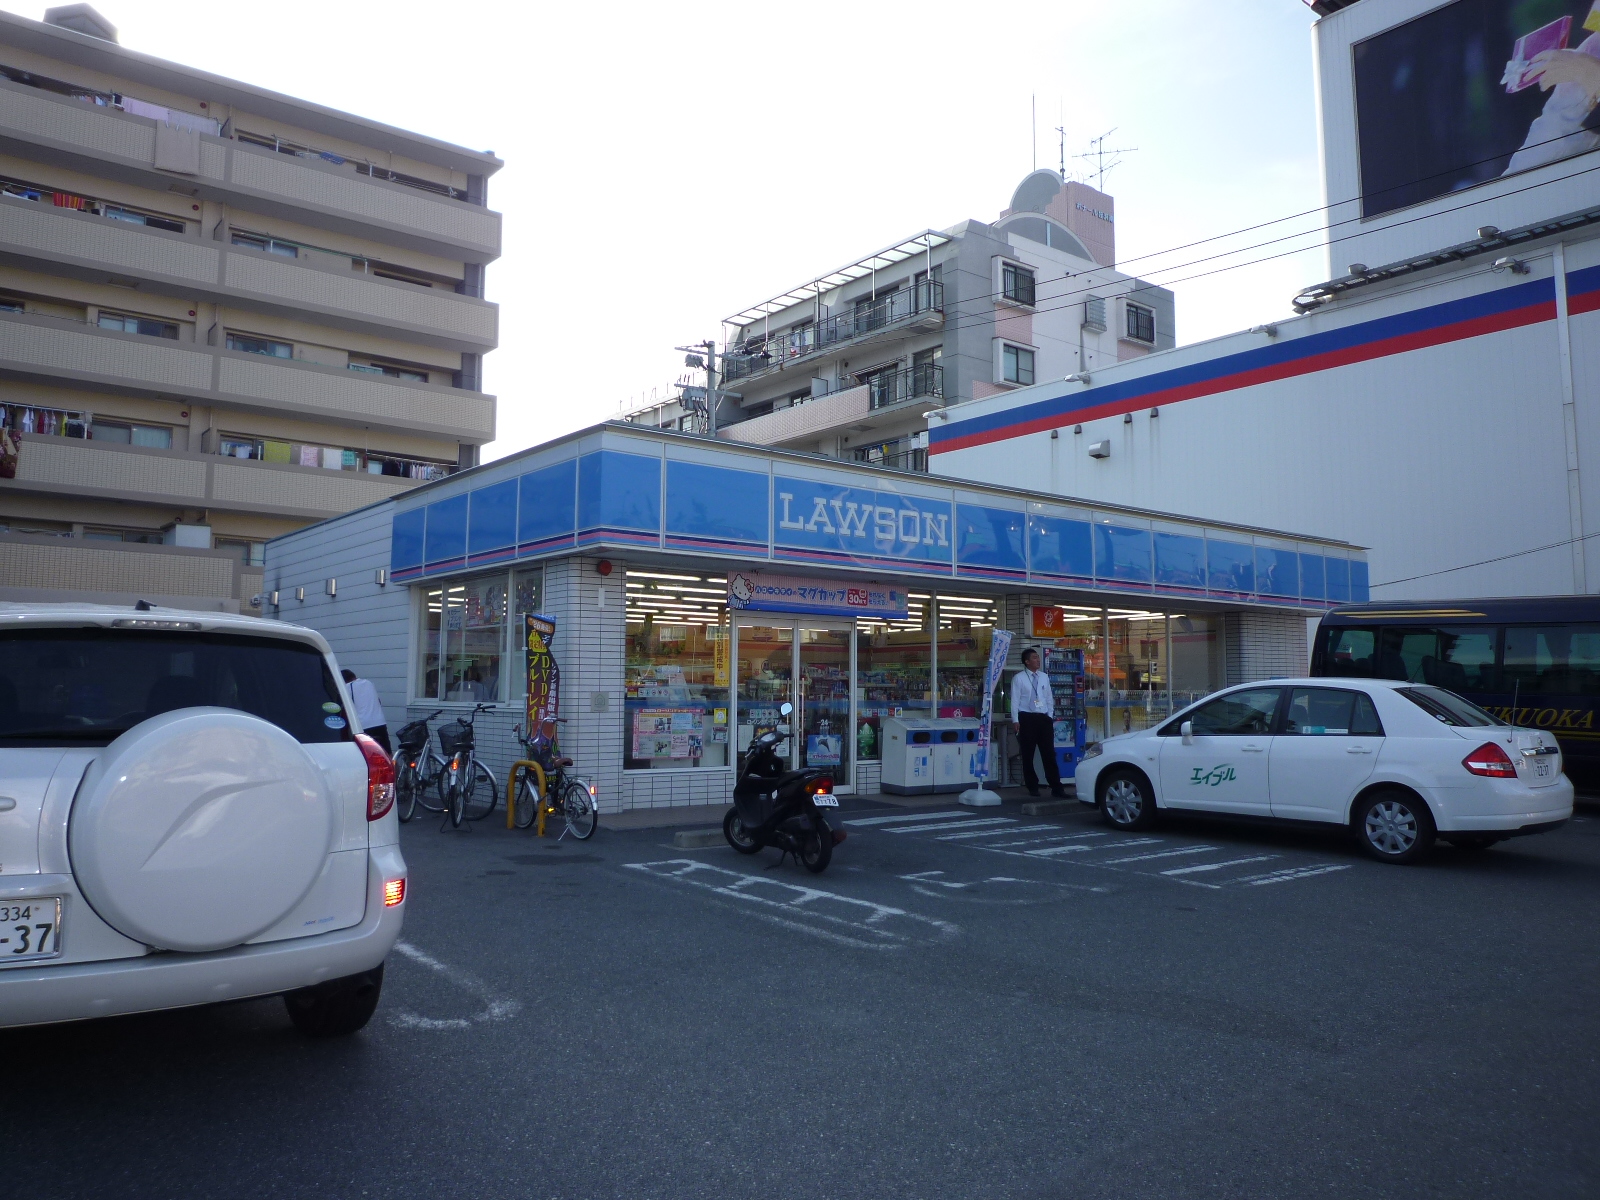 Convenience store. Lawson Ishimaru 1-chome to (convenience store) 401m